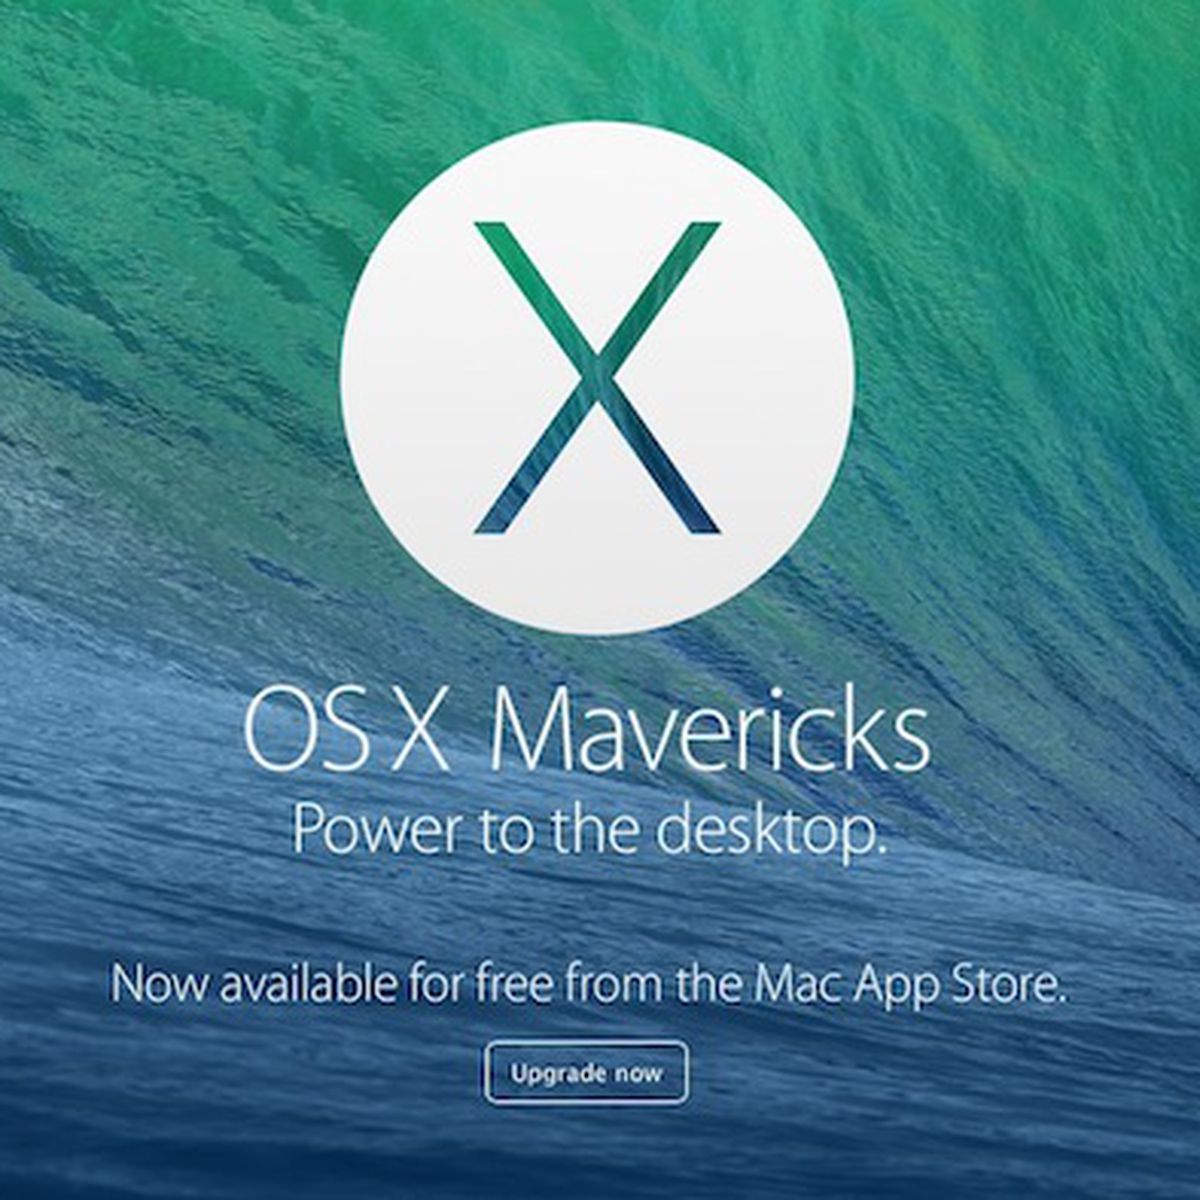 download mac os x mavericks 10.9 iso directly for free